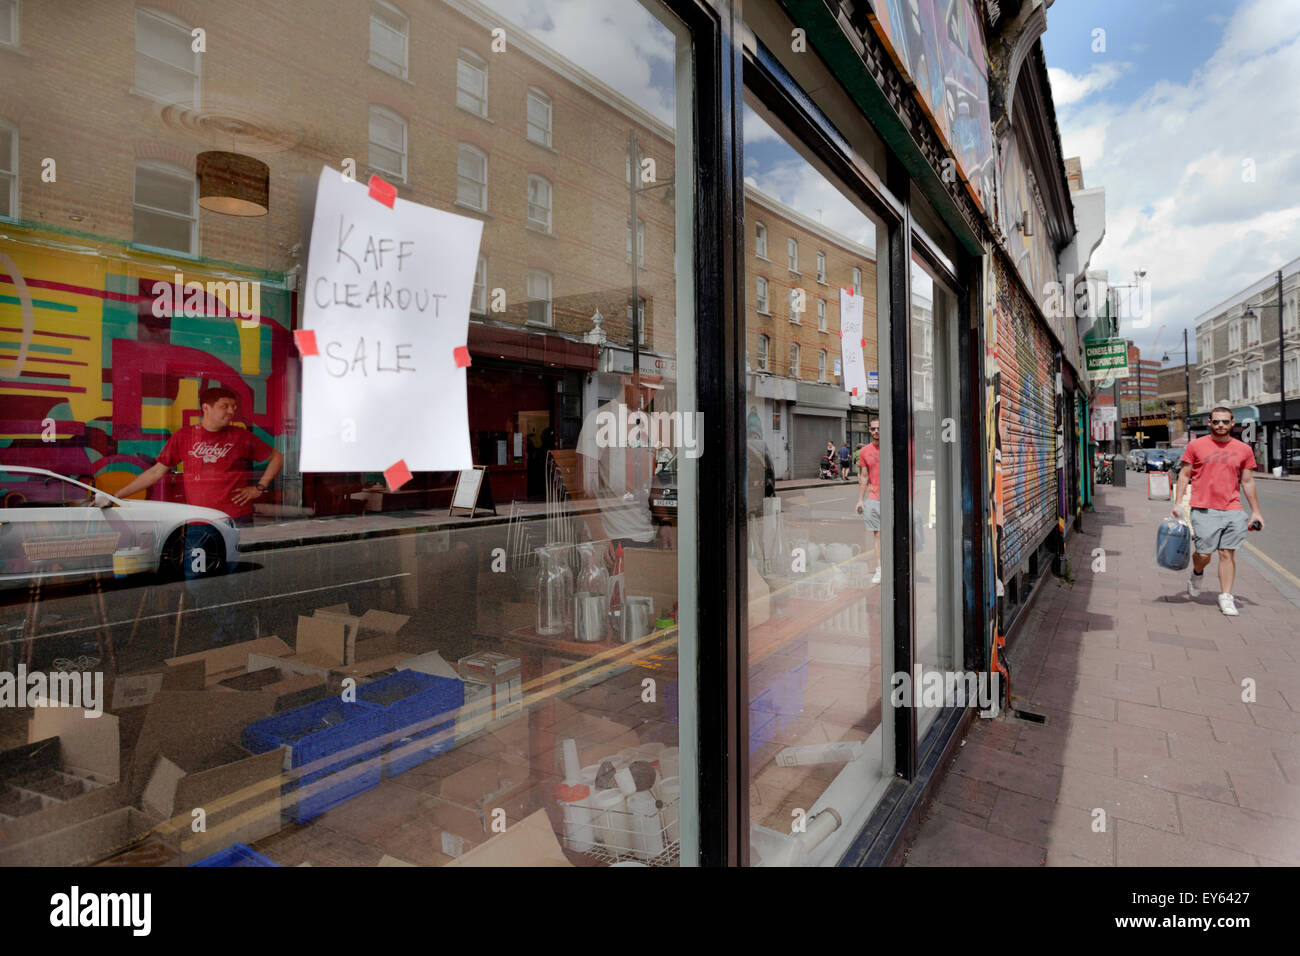 Brixton, London, UK. 22nd July, 2015. The popular Kaff Bar on Atlantic Road in Brixton has been forced to close due to the landlord tripling the rent.  Co-owner Elibet Galdomes can be seen through the window looking over the clearance sale. Credit:  Honey Salvadori/Alamy Live News Stock Photo